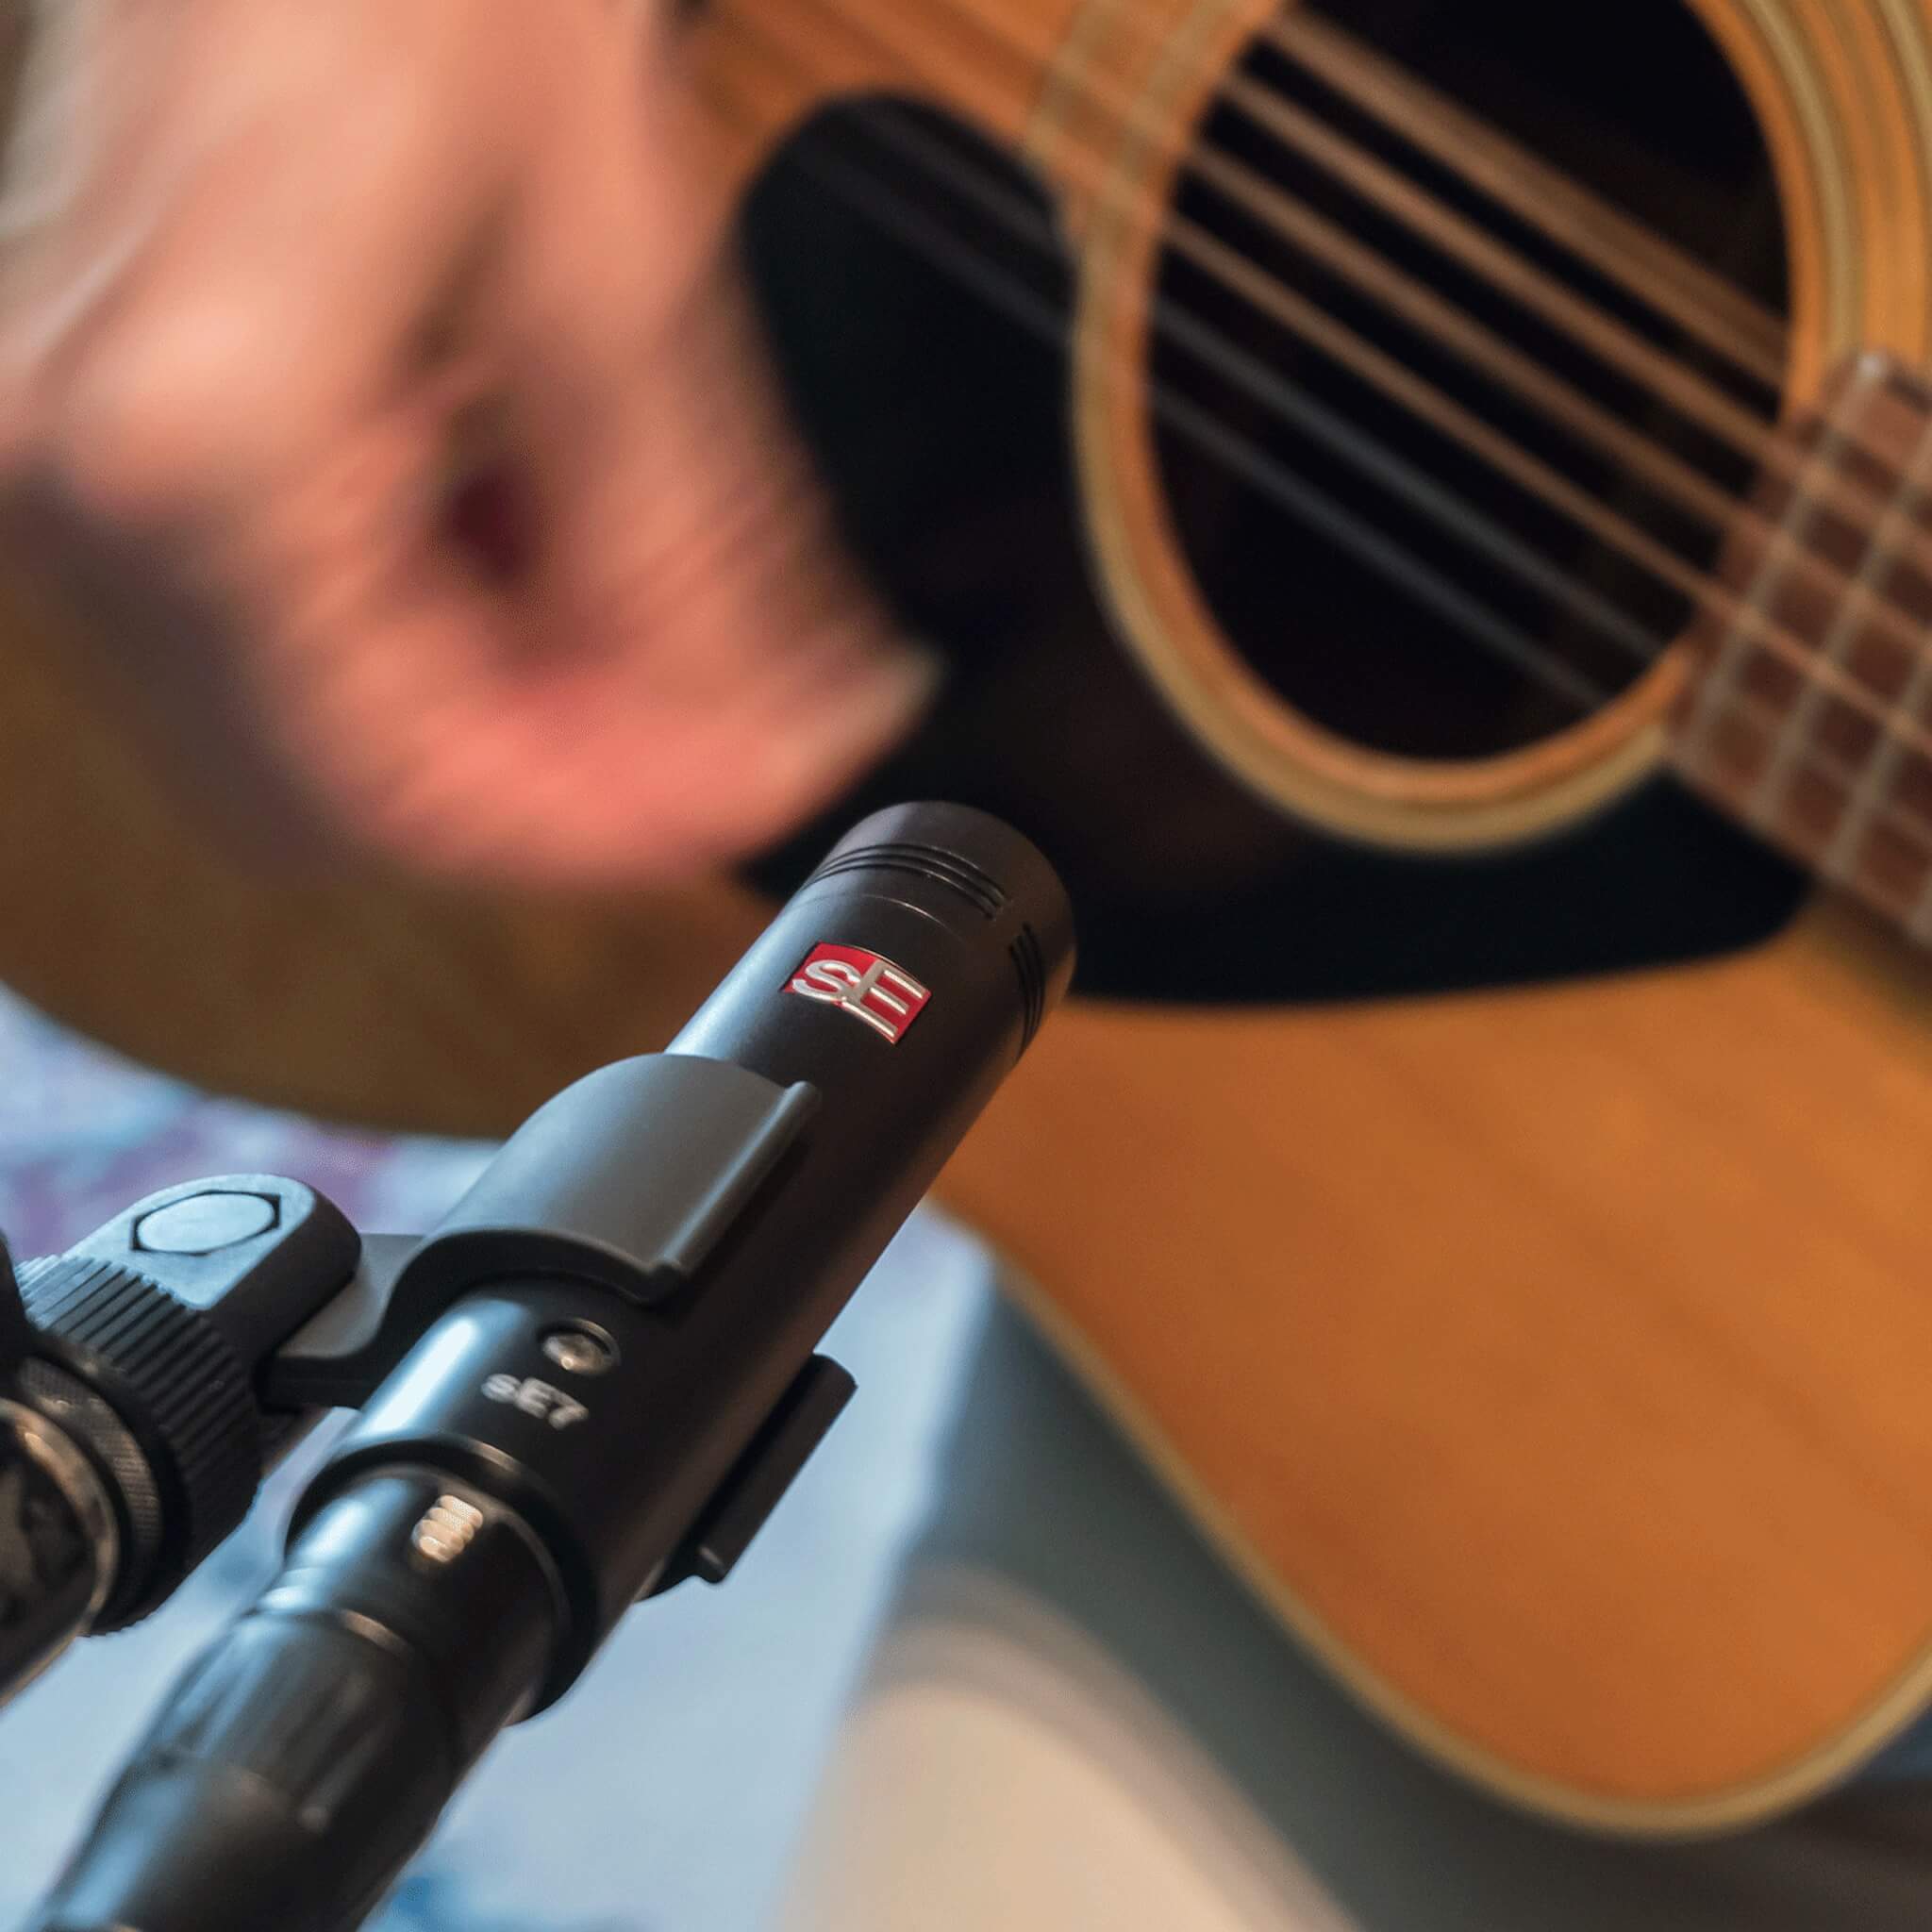 sE Electronics sE7 - Small Diaphragm Cardioid Condenser Microphone, in use with a guitar